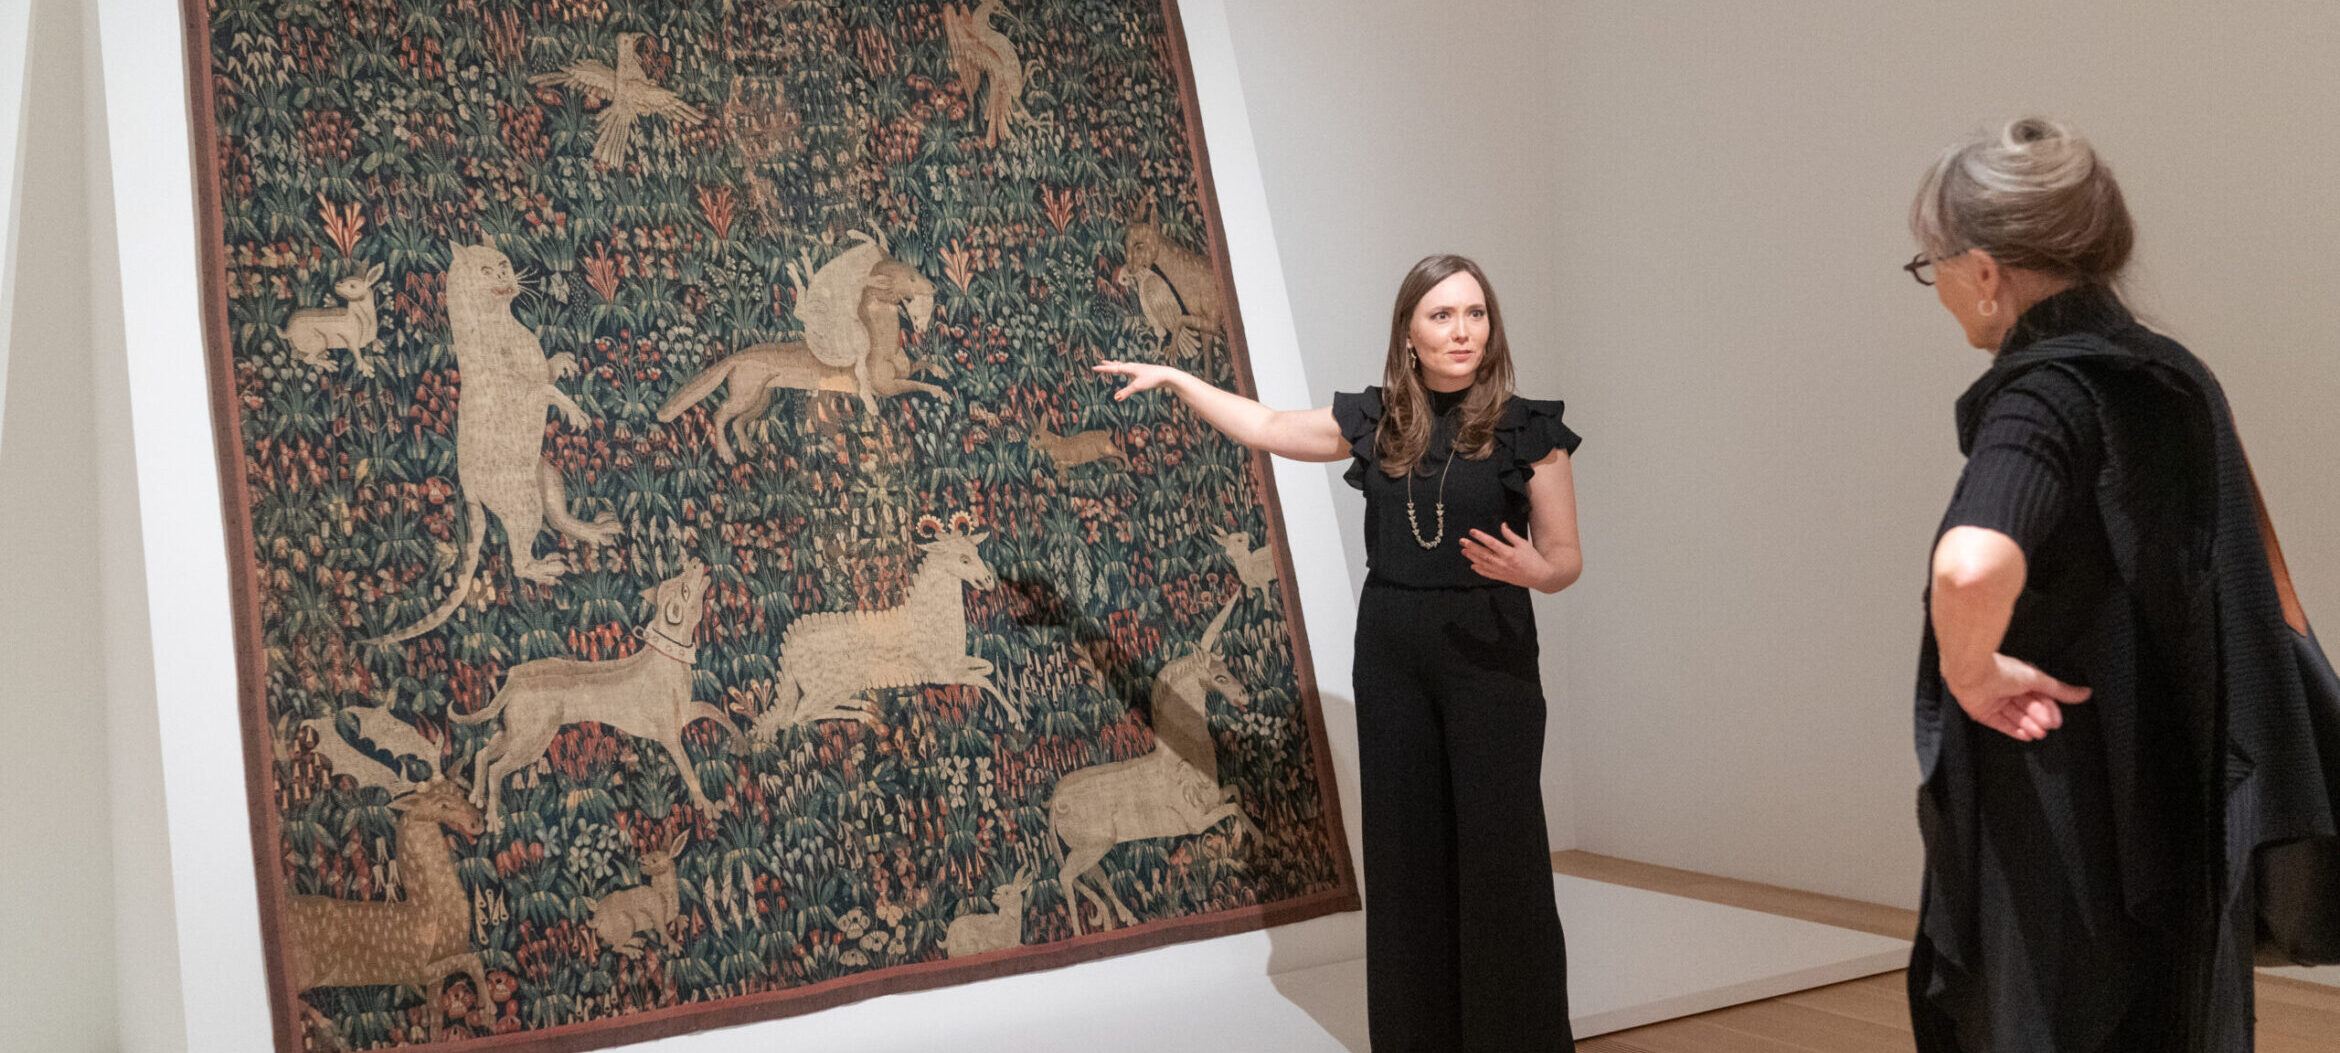 Assistant Curator, Heather Alexis Smith, point to the "Millefleurs Tapestry," a large floral tapestry with several animals and mythical creatures, hung at an angle on a white plinth.